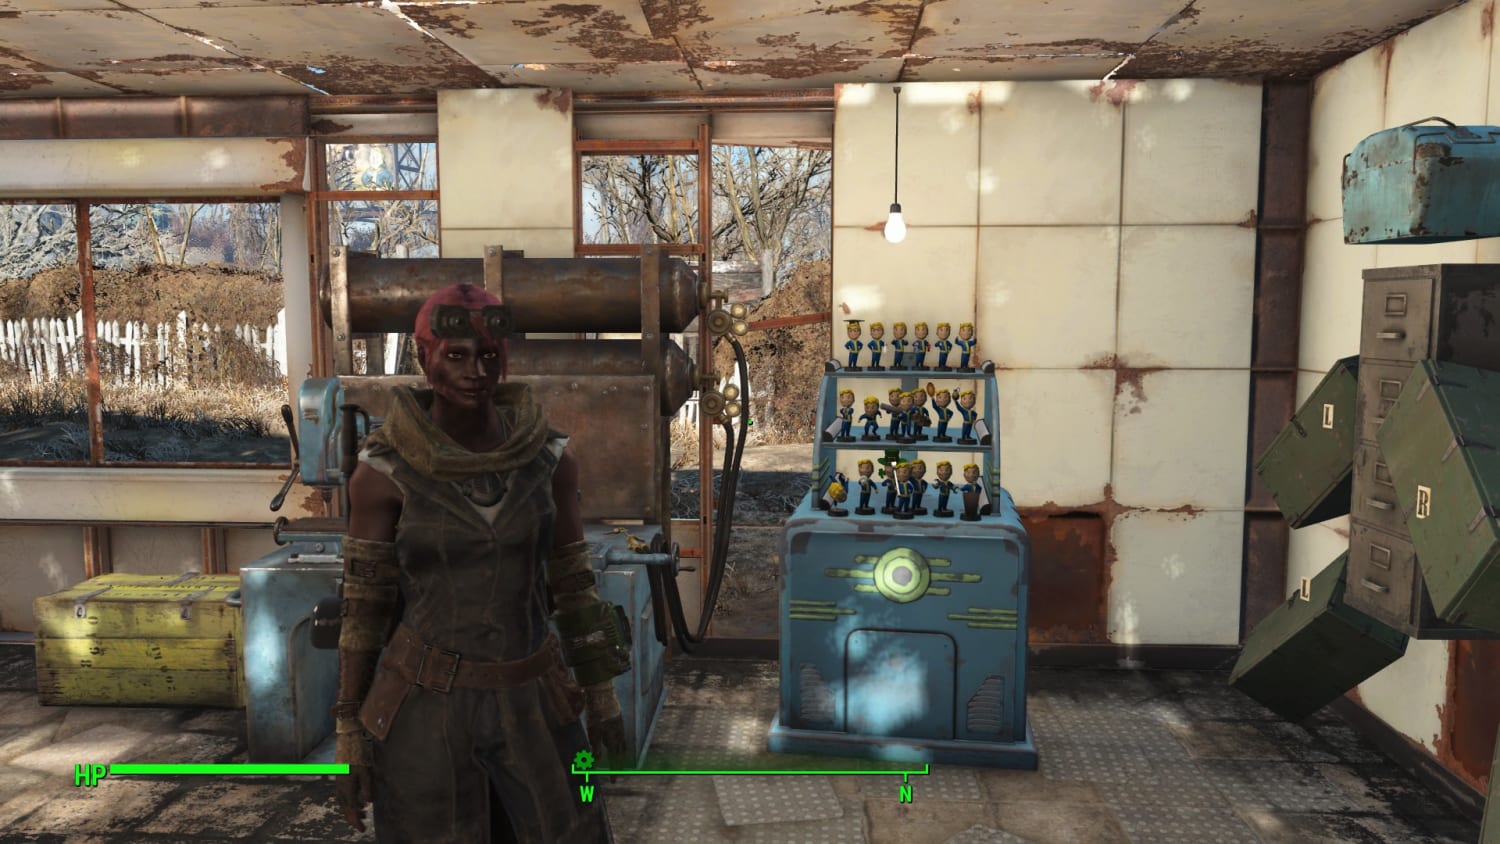 Serah "Scary Scarlet" Simmons, former MMA fighter turned Wasteland Survivor in Fallout 4